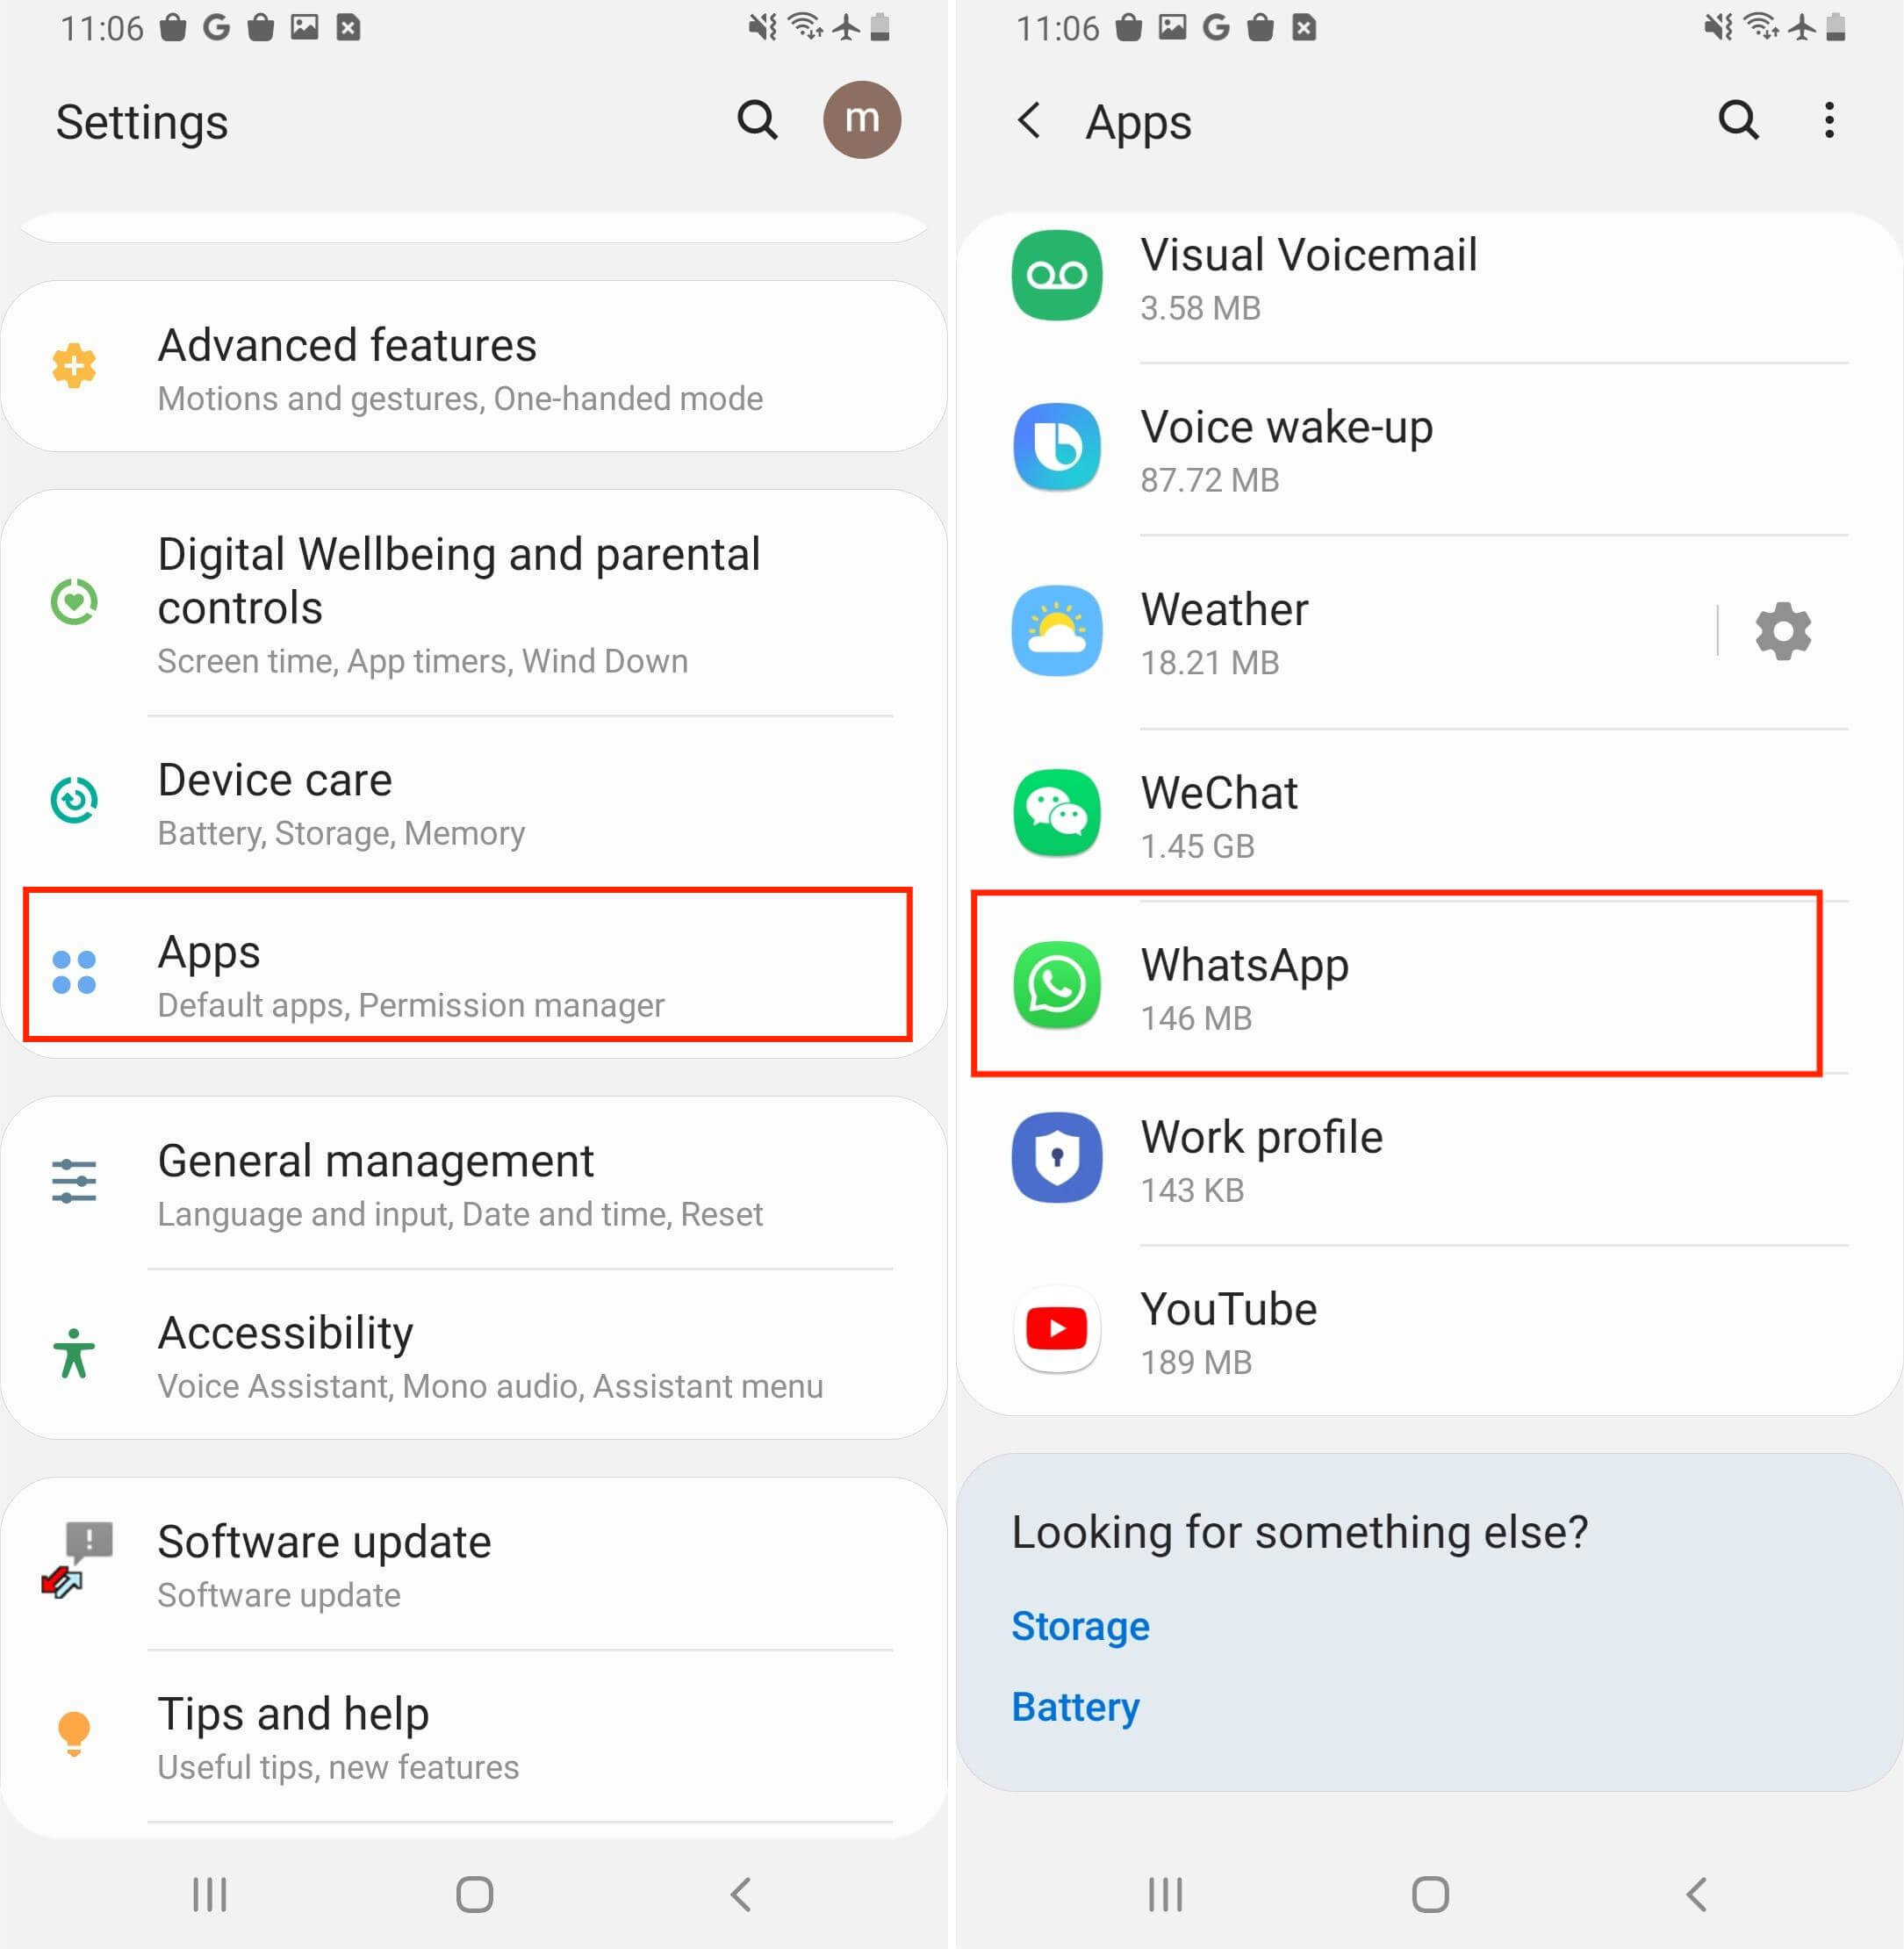 WhatsApp in Android Settings